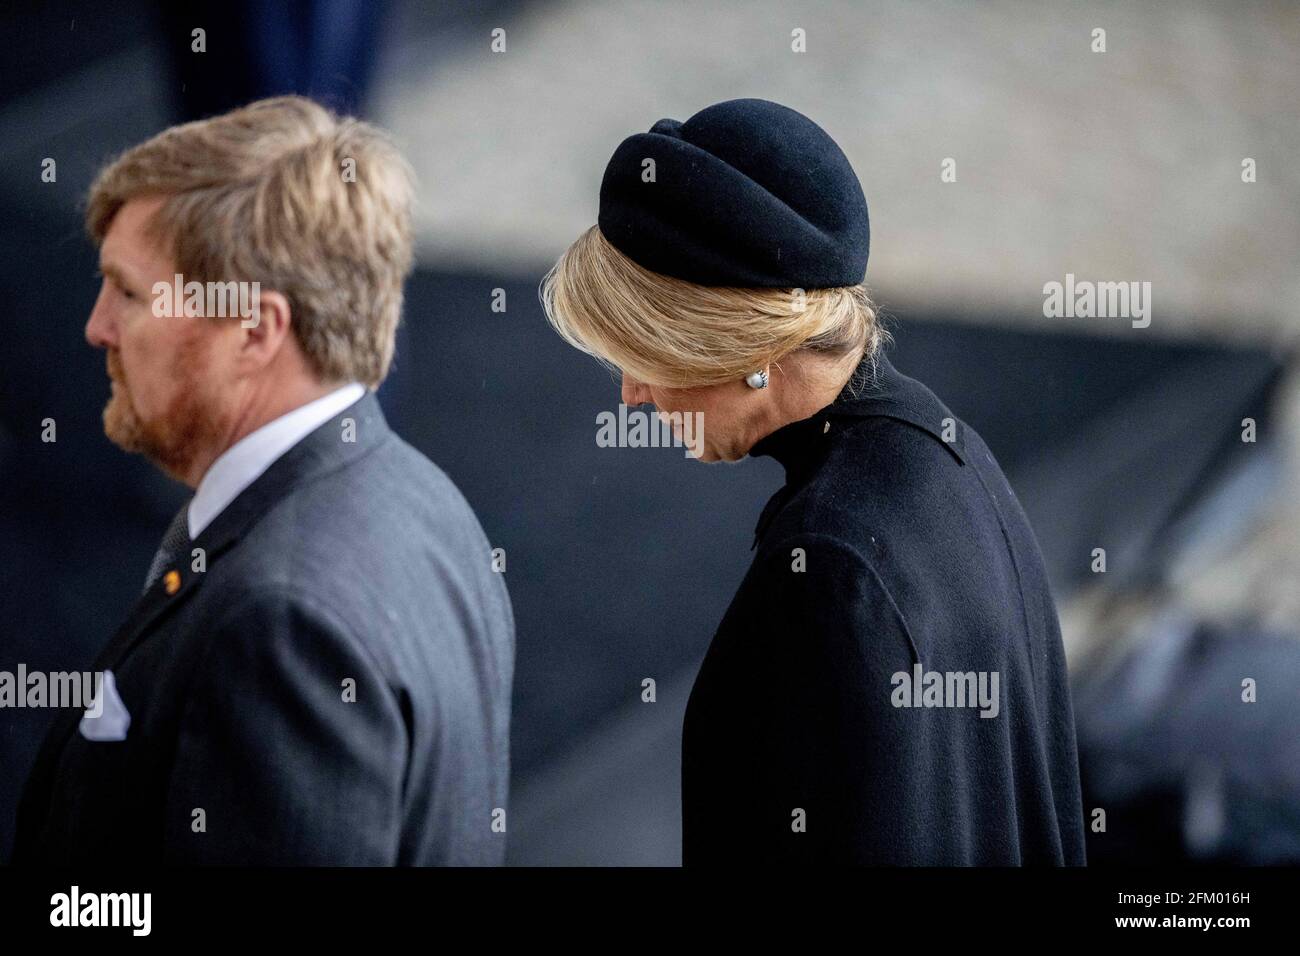 Amsterdam, Netherlands. 04th May, 2021. King Willem-Alexander and Queen Maxima of the Netherlands during the National WWII Memorial and wreath-laying Ceremony at National Monument on Dam Square in Amsterdam, Netherlands on May 4, 2021. Photo by Robin Utrech/ABACAPRESS.COM Credit: Abaca Press/Alamy Live News Stock Photo